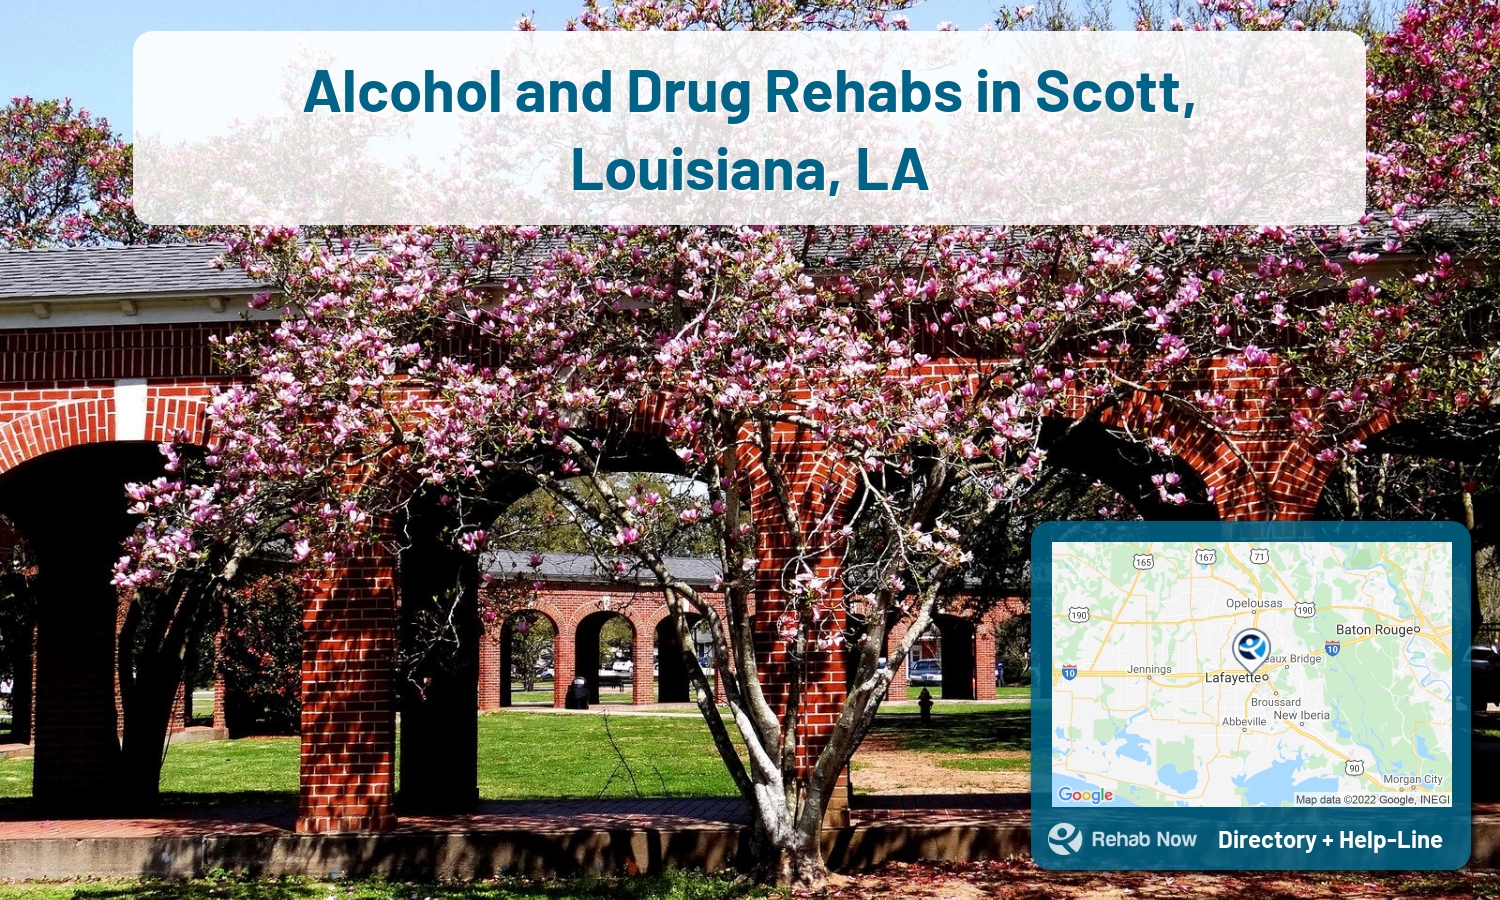 Find drug rehab and alcohol treatment services in Scott. Our experts help you find a center in Scott, Louisiana